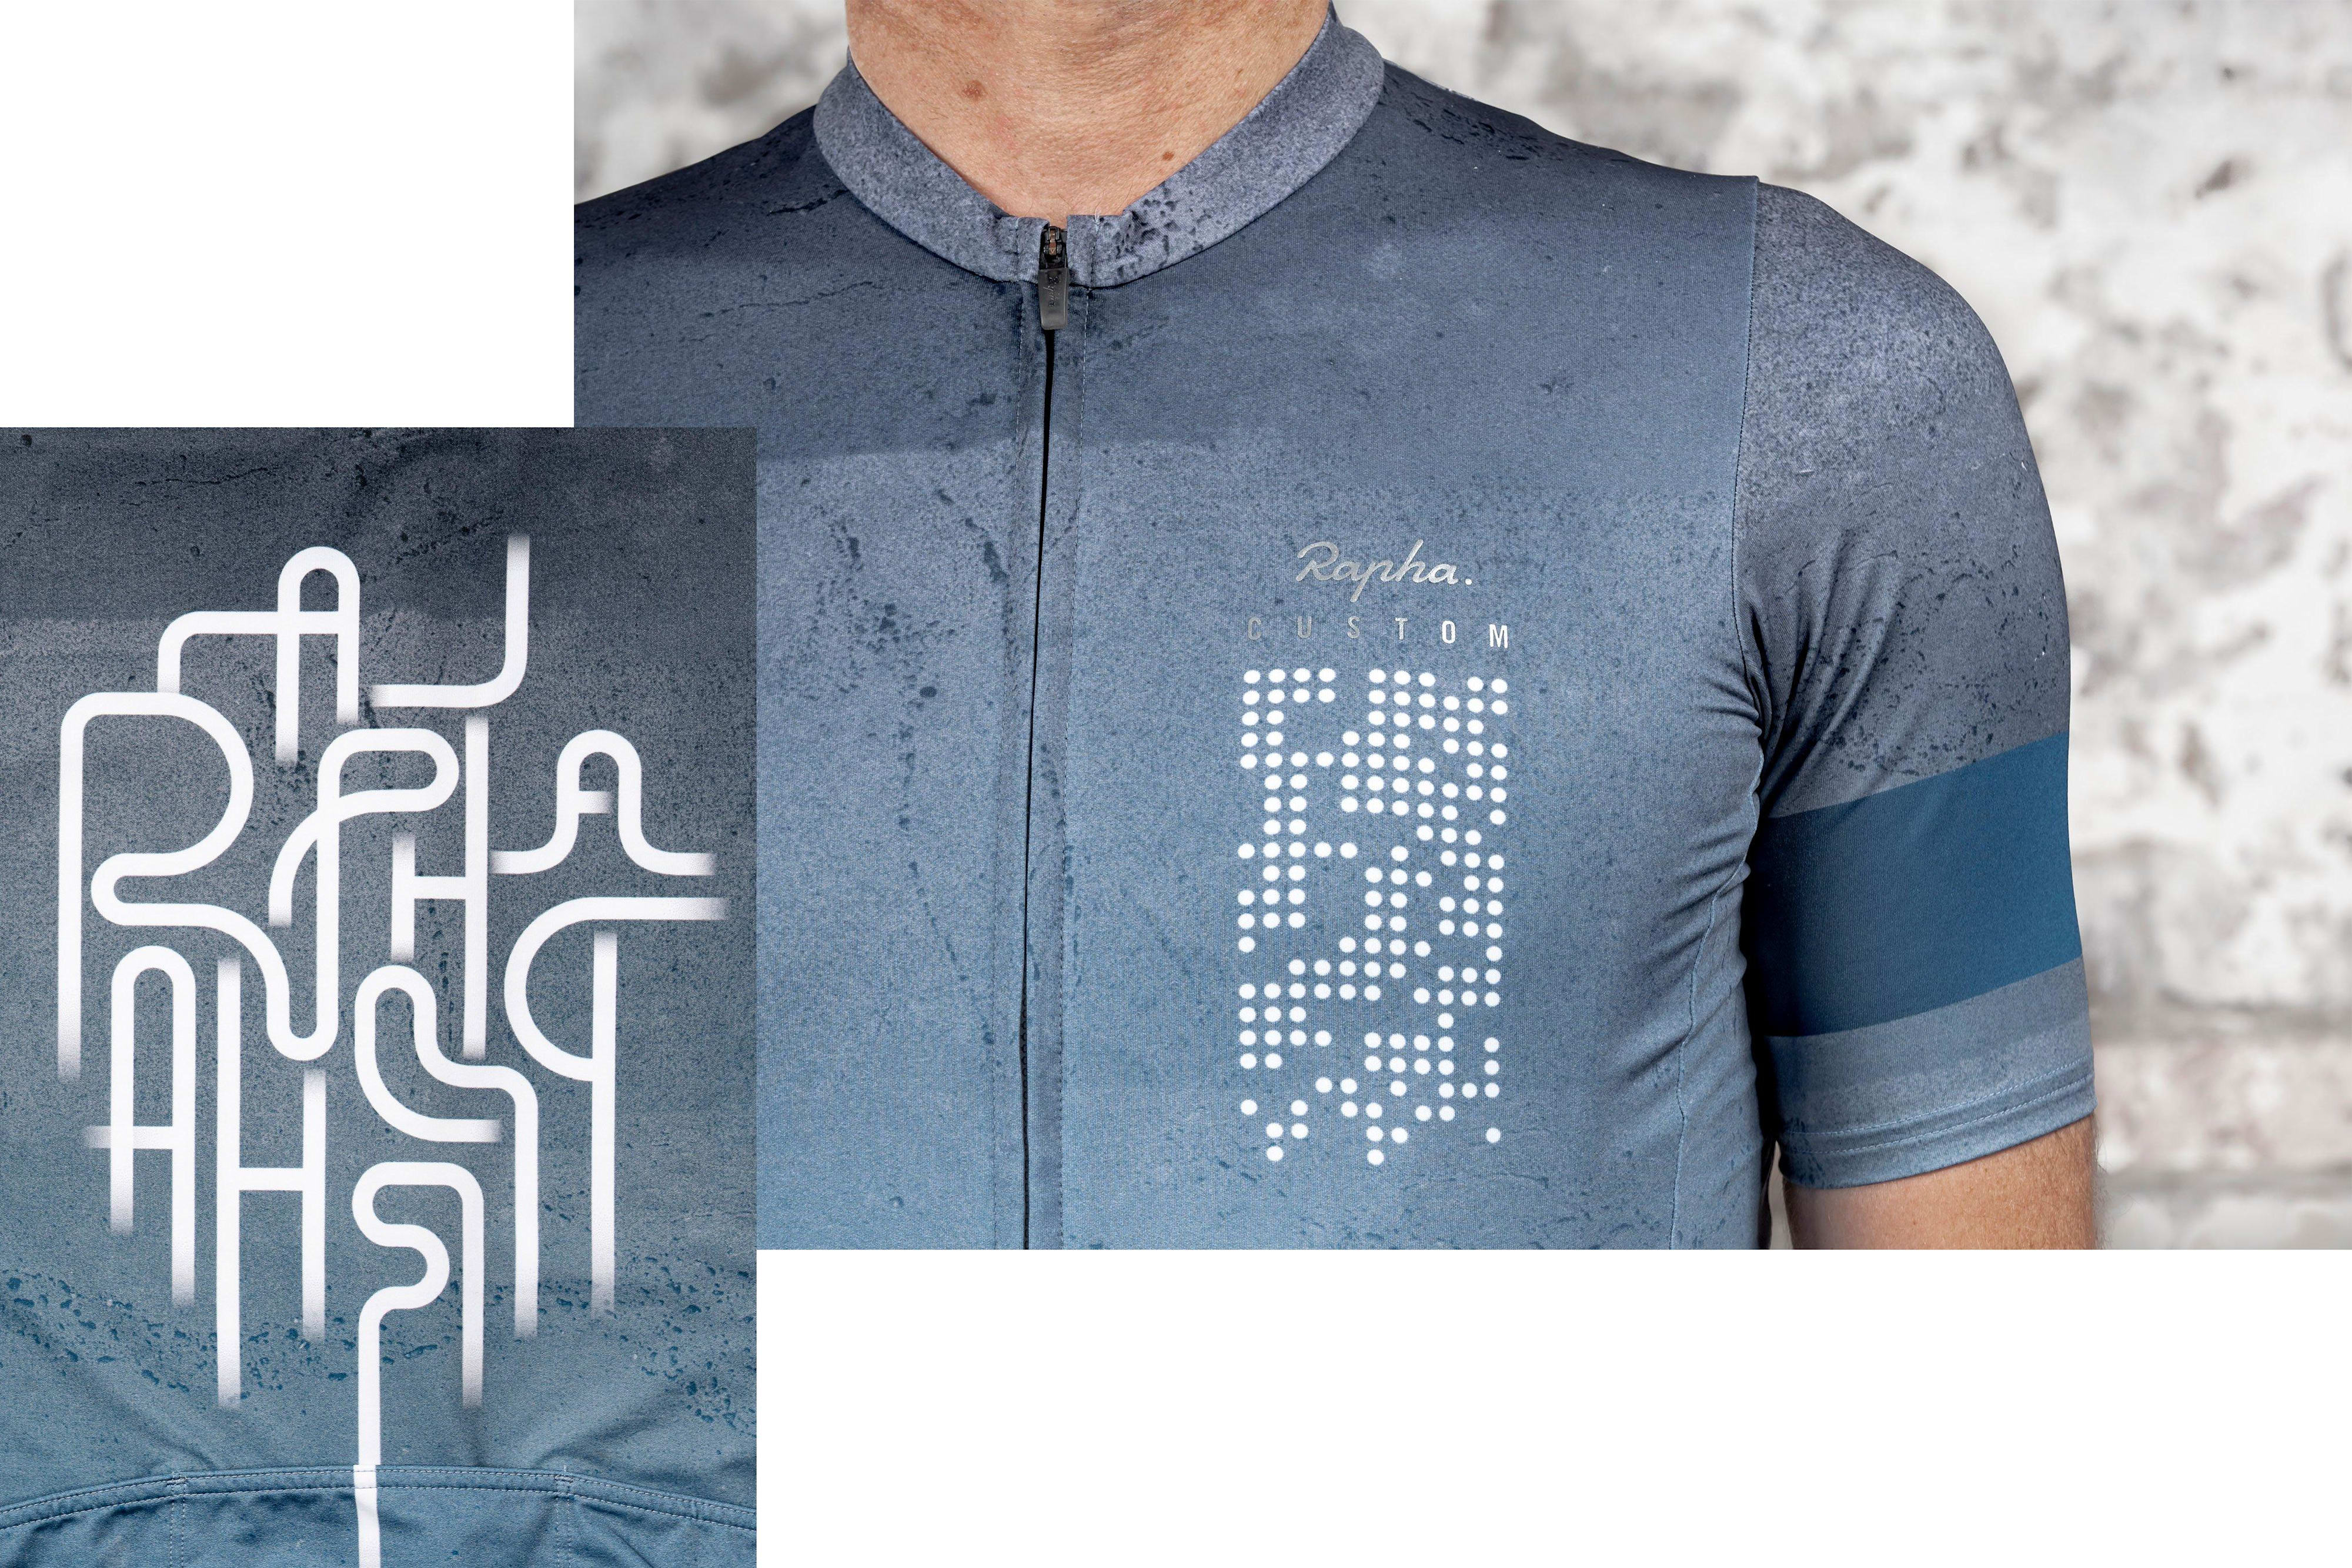 Havoc Frank Worthley Mus The World's Finest Cycling Clothing and Accessories. | Rapha